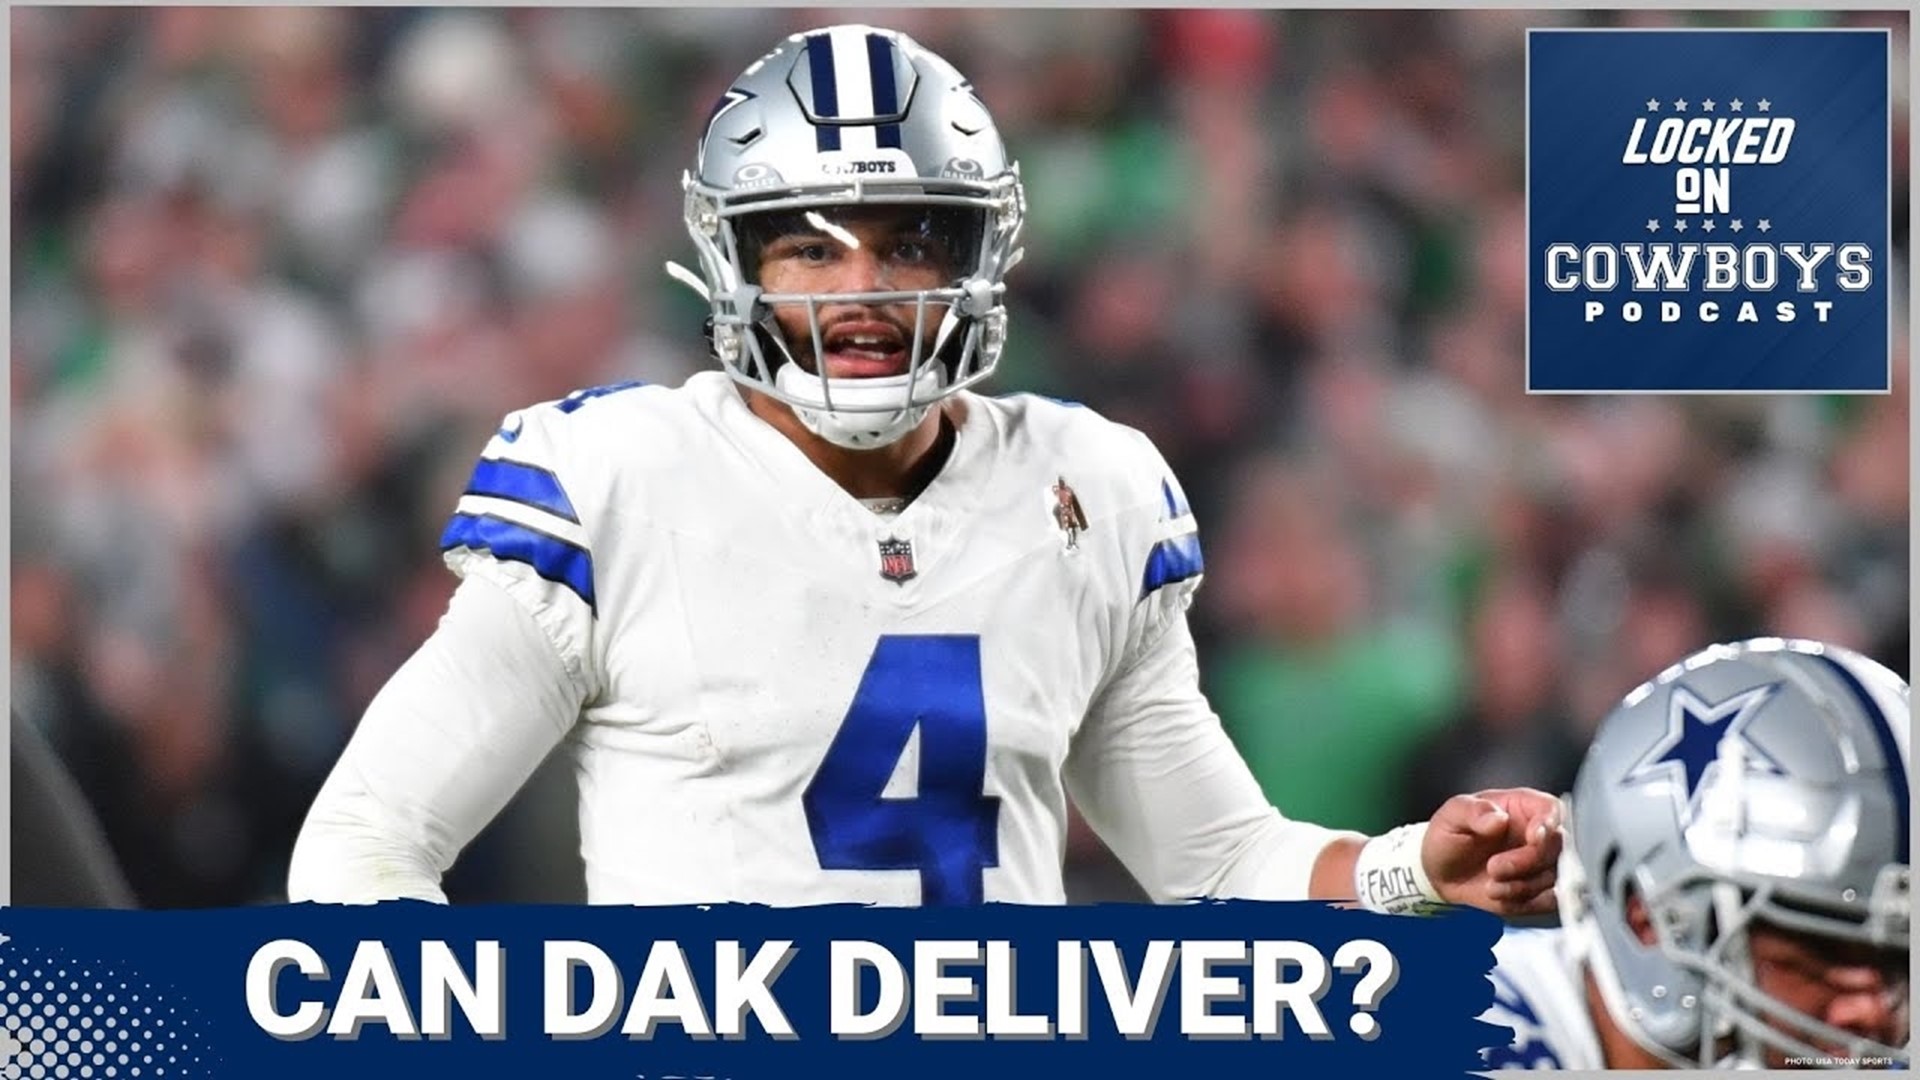 Dallas Cowboys QB Dak Prescott is one of the favorites to win the 2023-2024 NFL MVP award. Can he deliver a season-changing win?